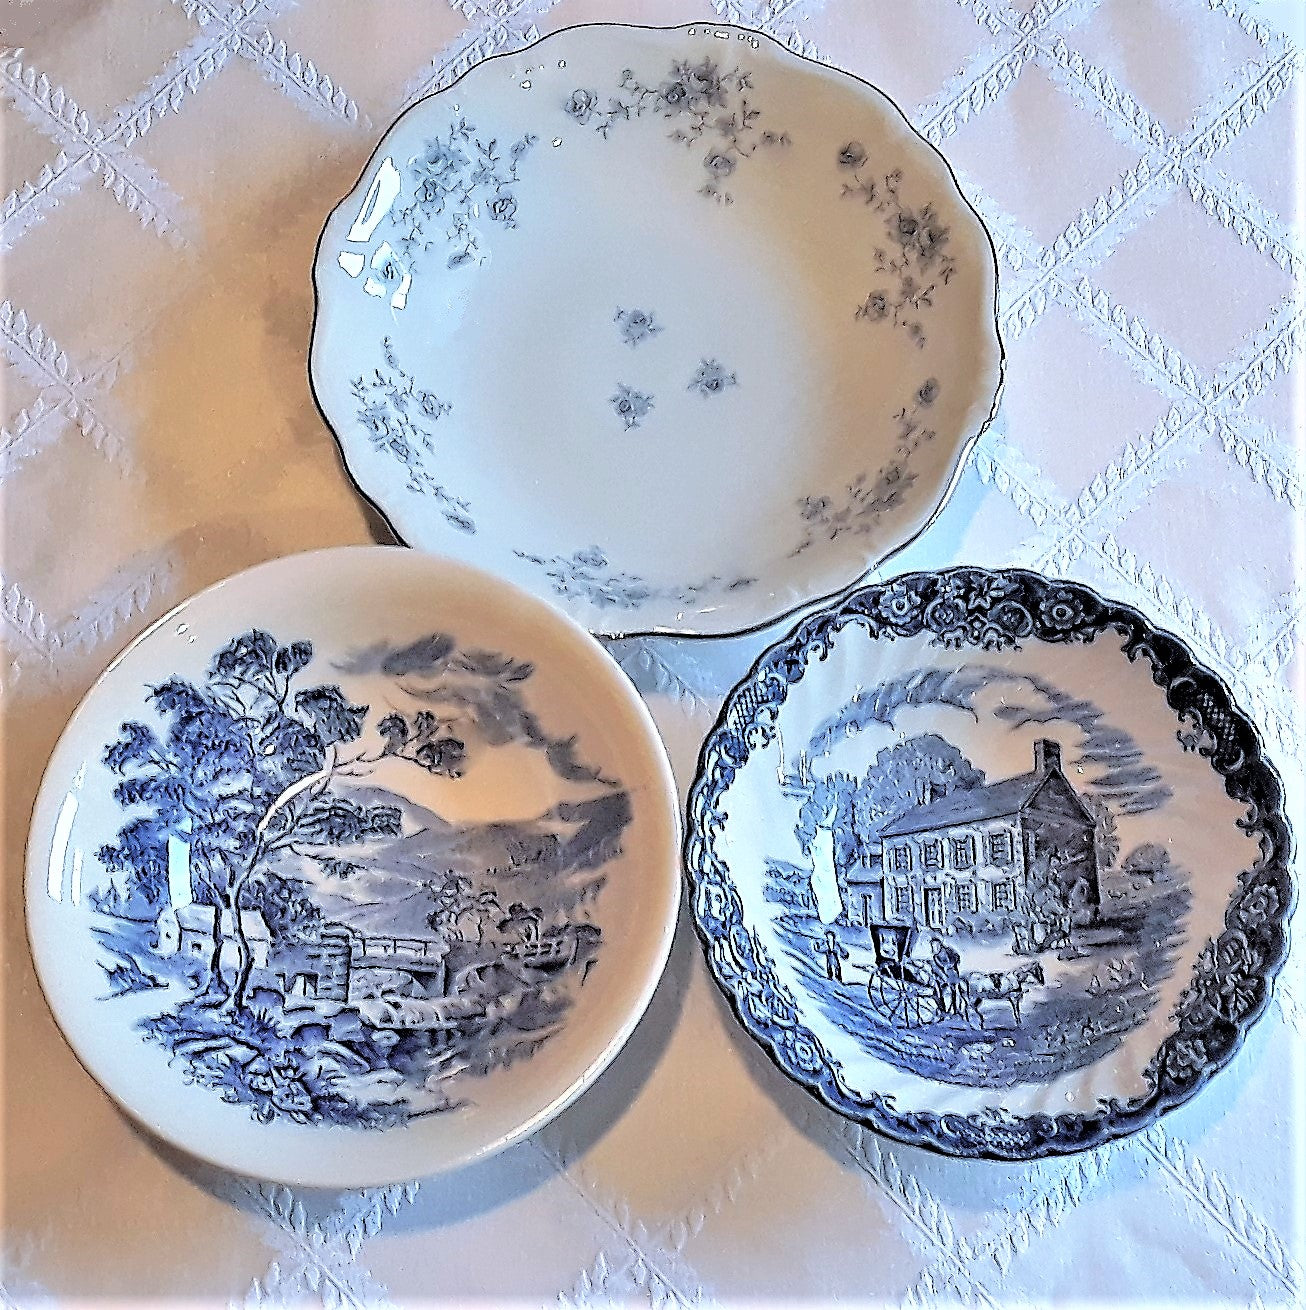 Blue and White Soup Bowl. Mismatched china rentals. Vintage Party Rentals with Royal Table Settings.